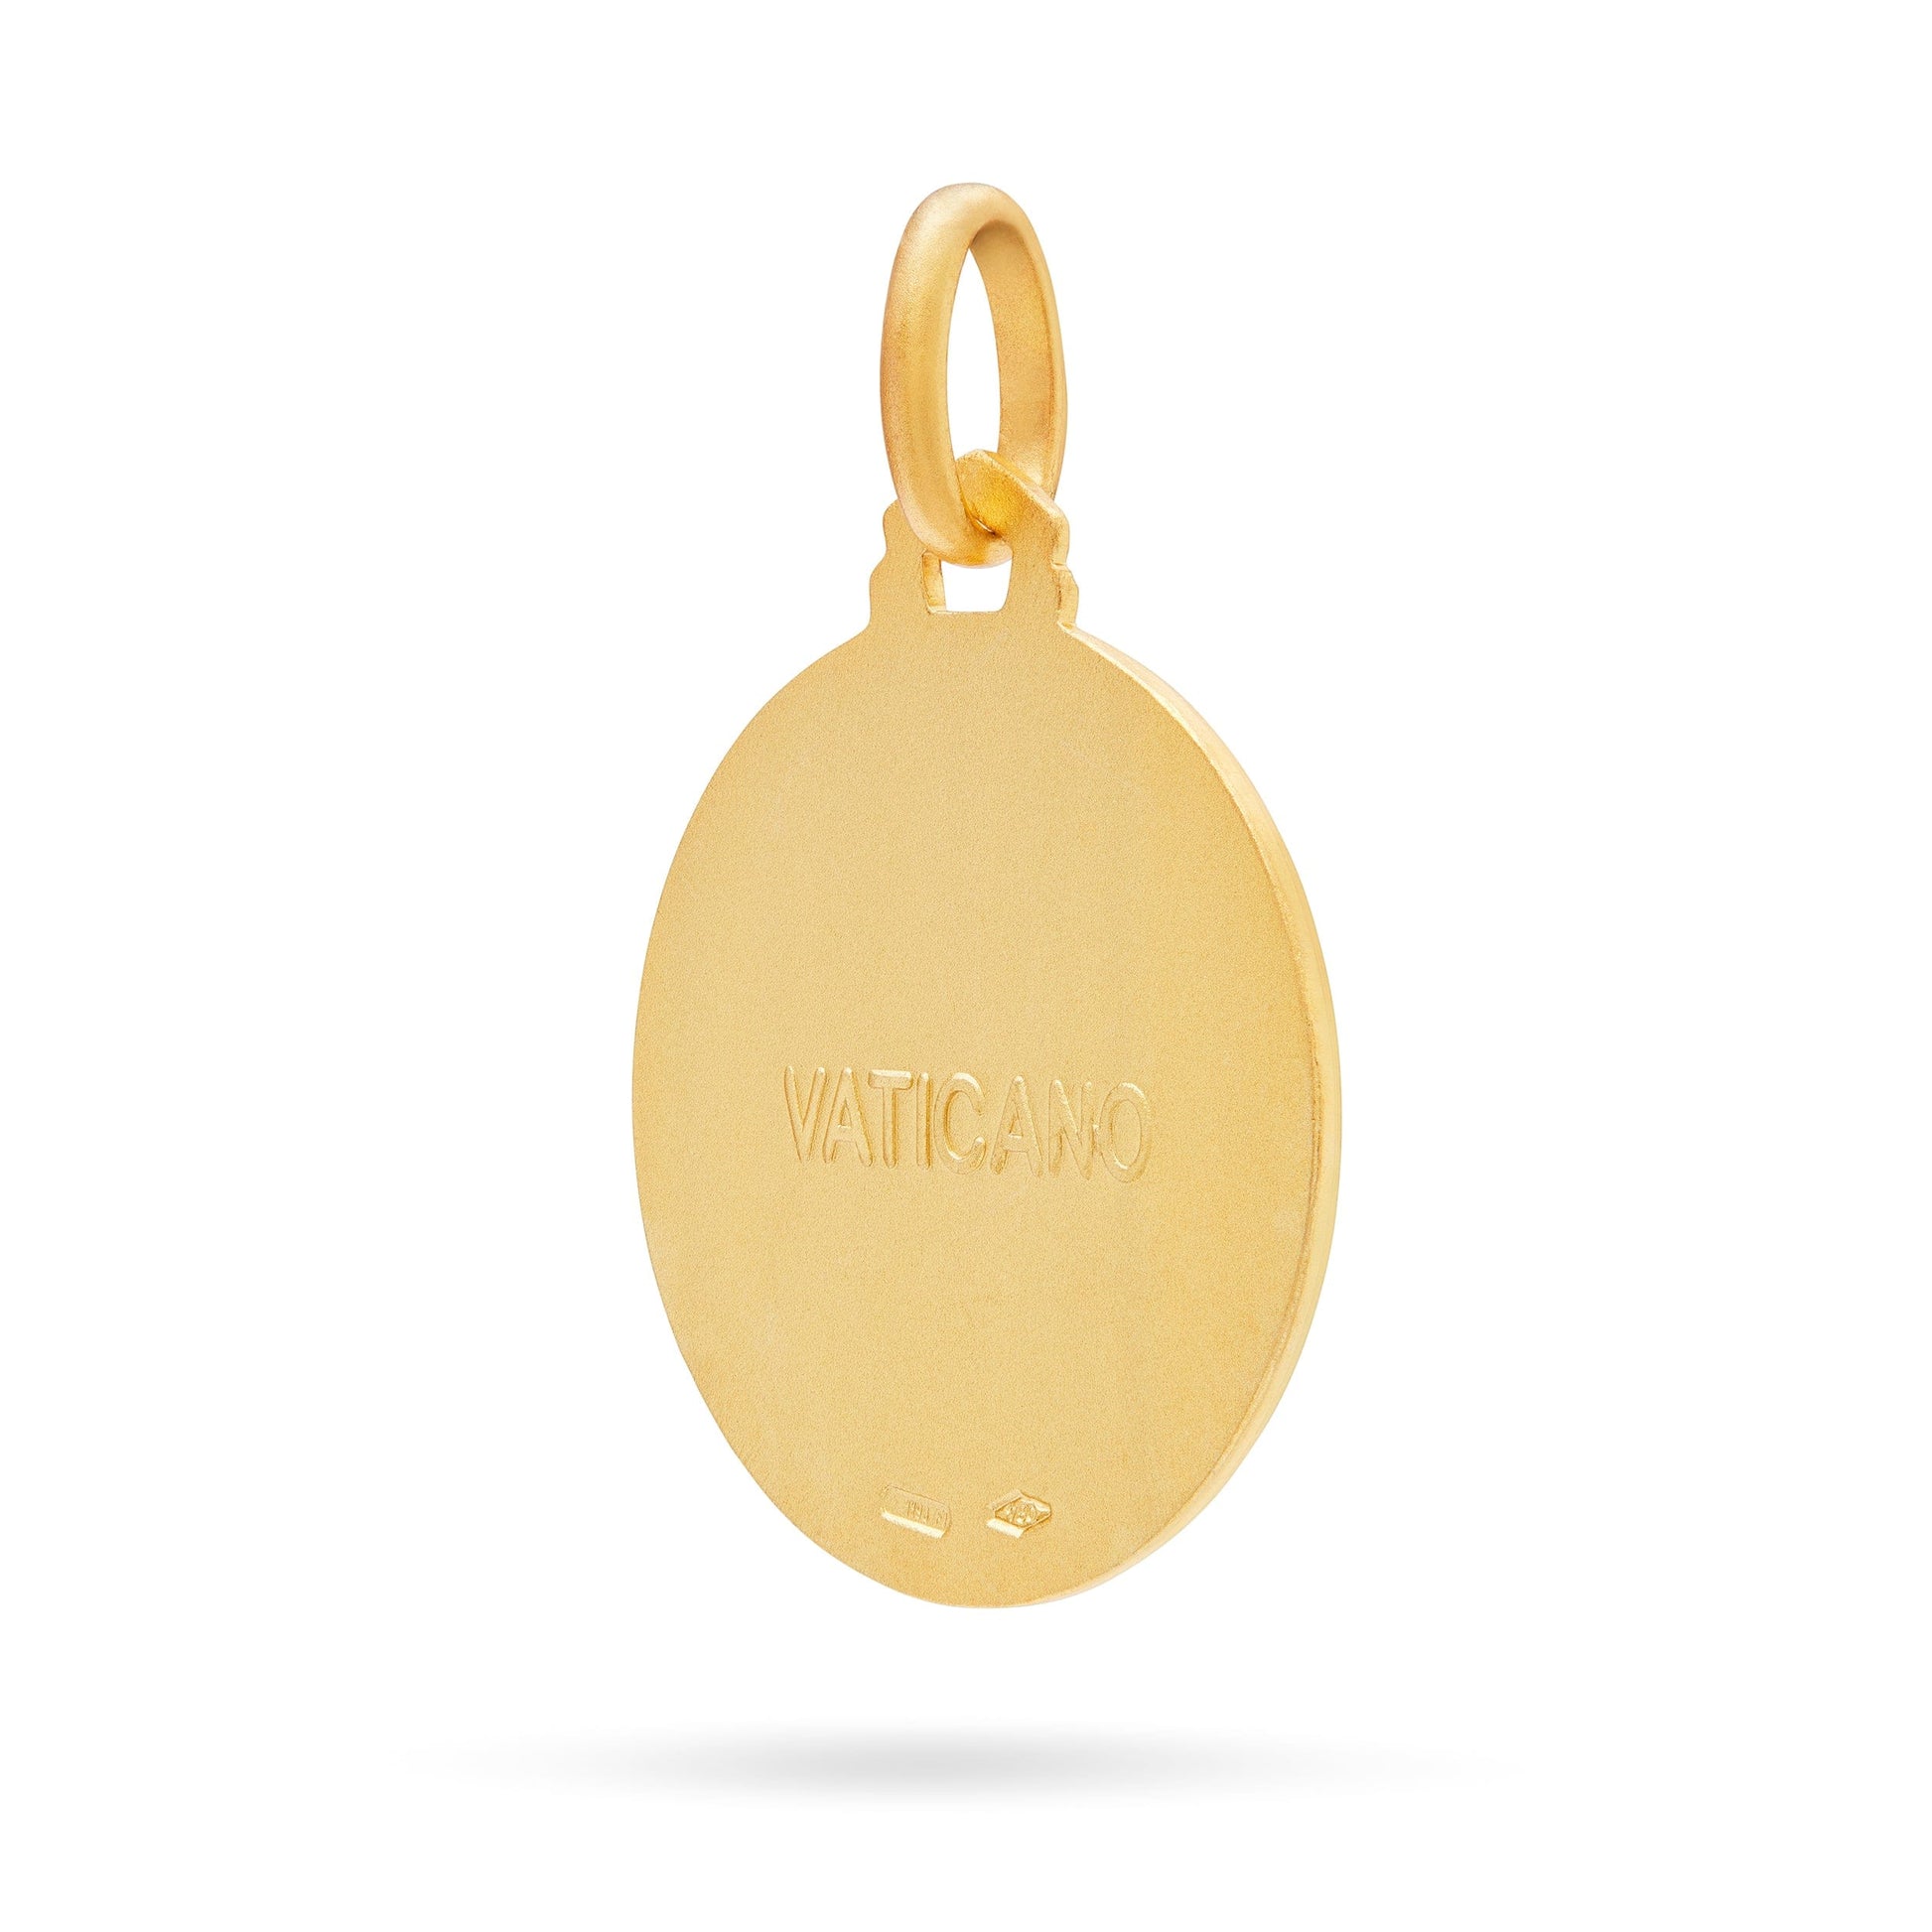 MONDO CATTOLICO Jewelry 16 mm (0.62 in) Yellow Gold Medal of Saint Ciro